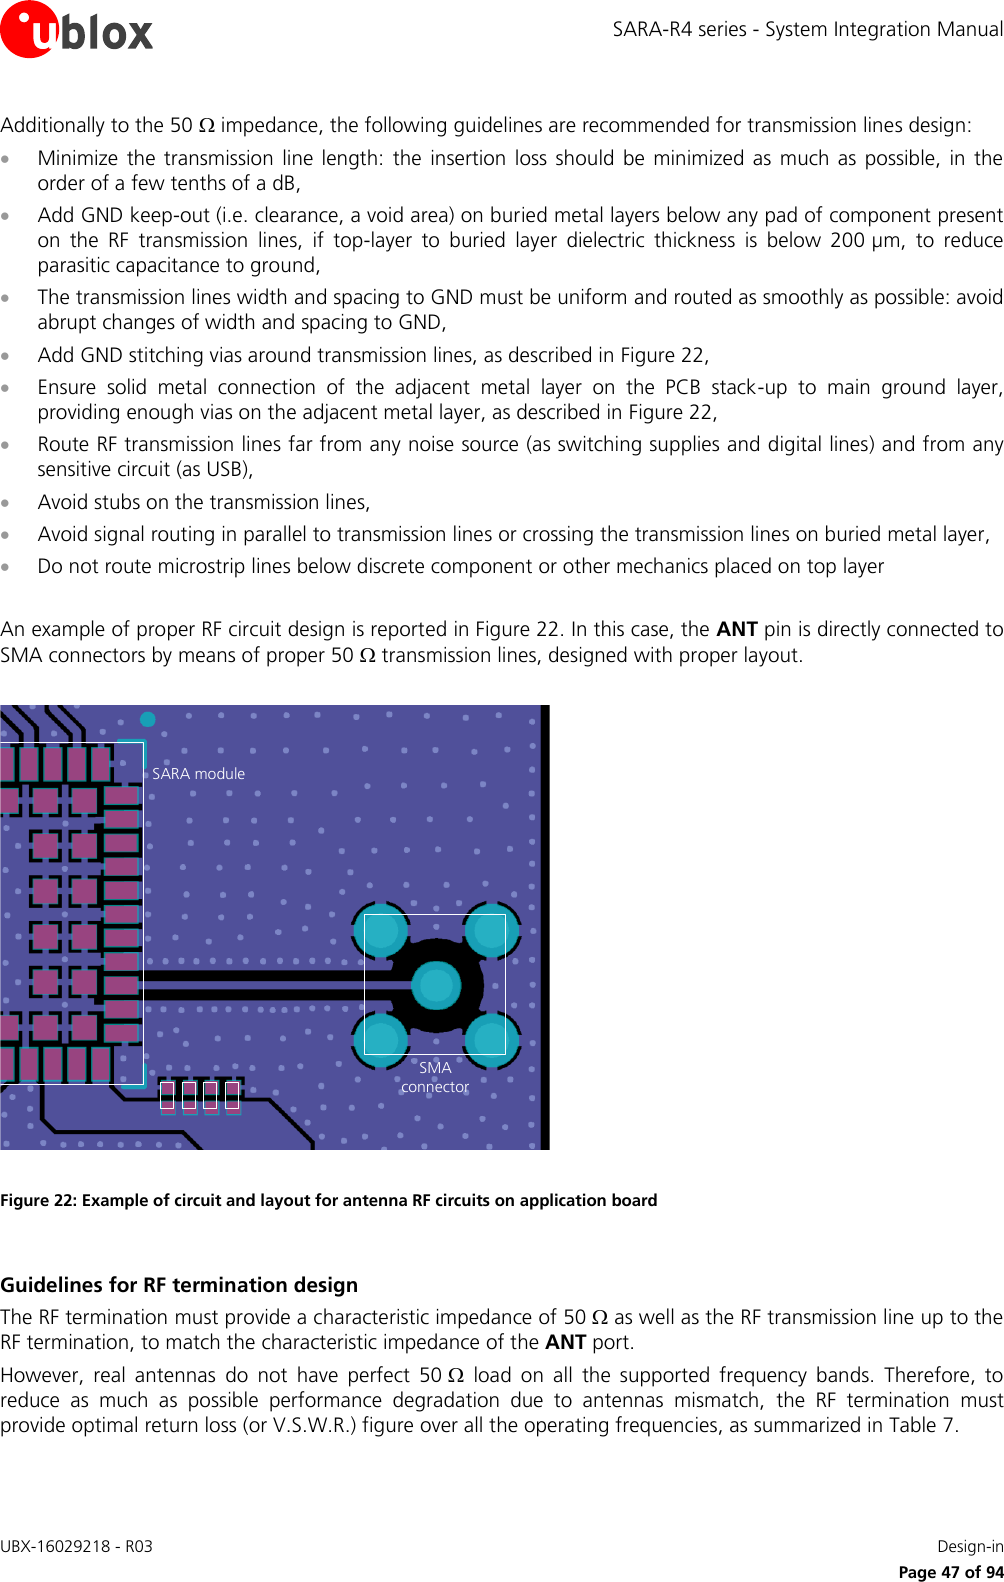 SARA-R4 series - System Integration Manual UBX-16029218 - R03    Design-in     Page 47 of 94 Additionally to the 50  impedance, the following guidelines are recommended for transmission lines design:  Minimize  the transmission  line length:  the  insertion  loss  should  be minimized as much  as possible,  in the order of a few tenths of a dB,  Add GND keep-out (i.e. clearance, a void area) on buried metal layers below any pad of component present on  the  RF  transmission  lines,  if  top-layer  to  buried  layer  dielectric  thickness  is  below  200 µm,  to  reduce parasitic capacitance to ground,  The transmission lines width and spacing to GND must be uniform and routed as smoothly as possible: avoid abrupt changes of width and spacing to GND,  Add GND stitching vias around transmission lines, as described in Figure 22,  Ensure  solid  metal  connection  of  the  adjacent  metal  layer  on  the  PCB  stack-up  to  main  ground  layer, providing enough vias on the adjacent metal layer, as described in Figure 22,  Route RF transmission lines far from any noise source (as switching supplies and digital lines) and from any sensitive circuit (as USB),  Avoid stubs on the transmission lines,  Avoid signal routing in parallel to transmission lines or crossing the transmission lines on buried metal layer,  Do not route microstrip lines below discrete component or other mechanics placed on top layer  An example of proper RF circuit design is reported in Figure 22. In this case, the ANT pin is directly connected to SMA connectors by means of proper 50  transmission lines, designed with proper layout.   Figure 22: Example of circuit and layout for antenna RF circuits on application board  Guidelines for RF termination design The RF termination must provide a characteristic impedance of 50  as well as the RF transmission line up to the RF termination, to match the characteristic impedance of the ANT port. However,  real  antennas  do  not  have  perfect  50   load  on  all  the  supported  frequency  bands.  Therefore,  to reduce  as  much  as  possible  performance  degradation  due  to  antennas  mismatch,  the  RF  termination  must provide optimal return loss (or V.S.W.R.) figure over all the operating frequencies, as summarized in Table 7.  SARA moduleSMAconnector